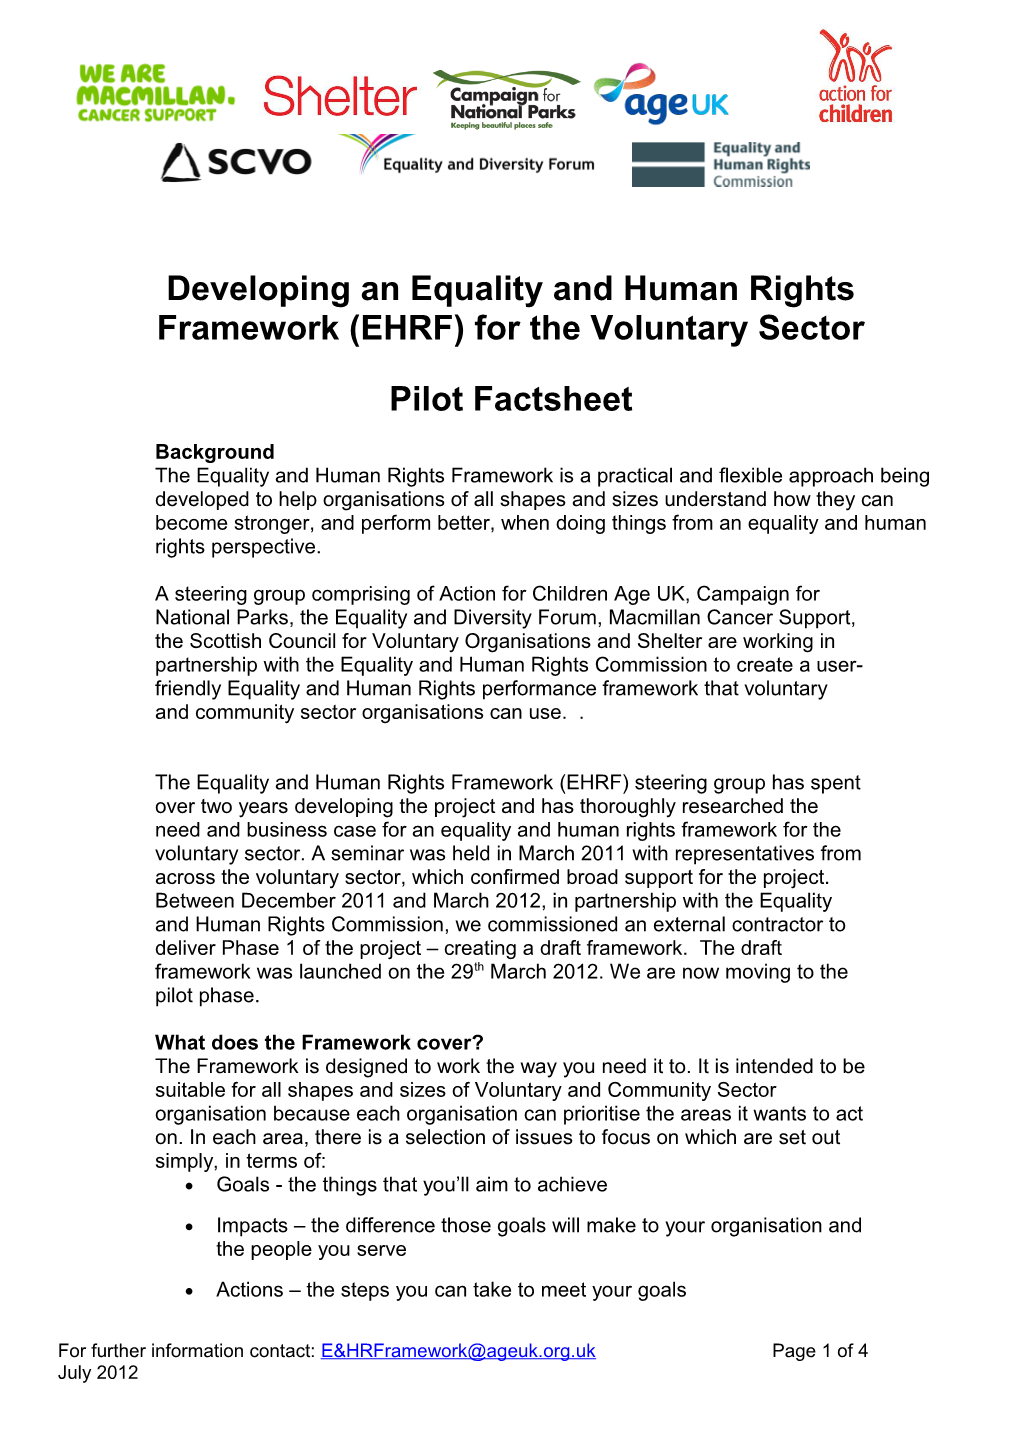 Developing an Equality and Human Rights Framework for the Third Sector